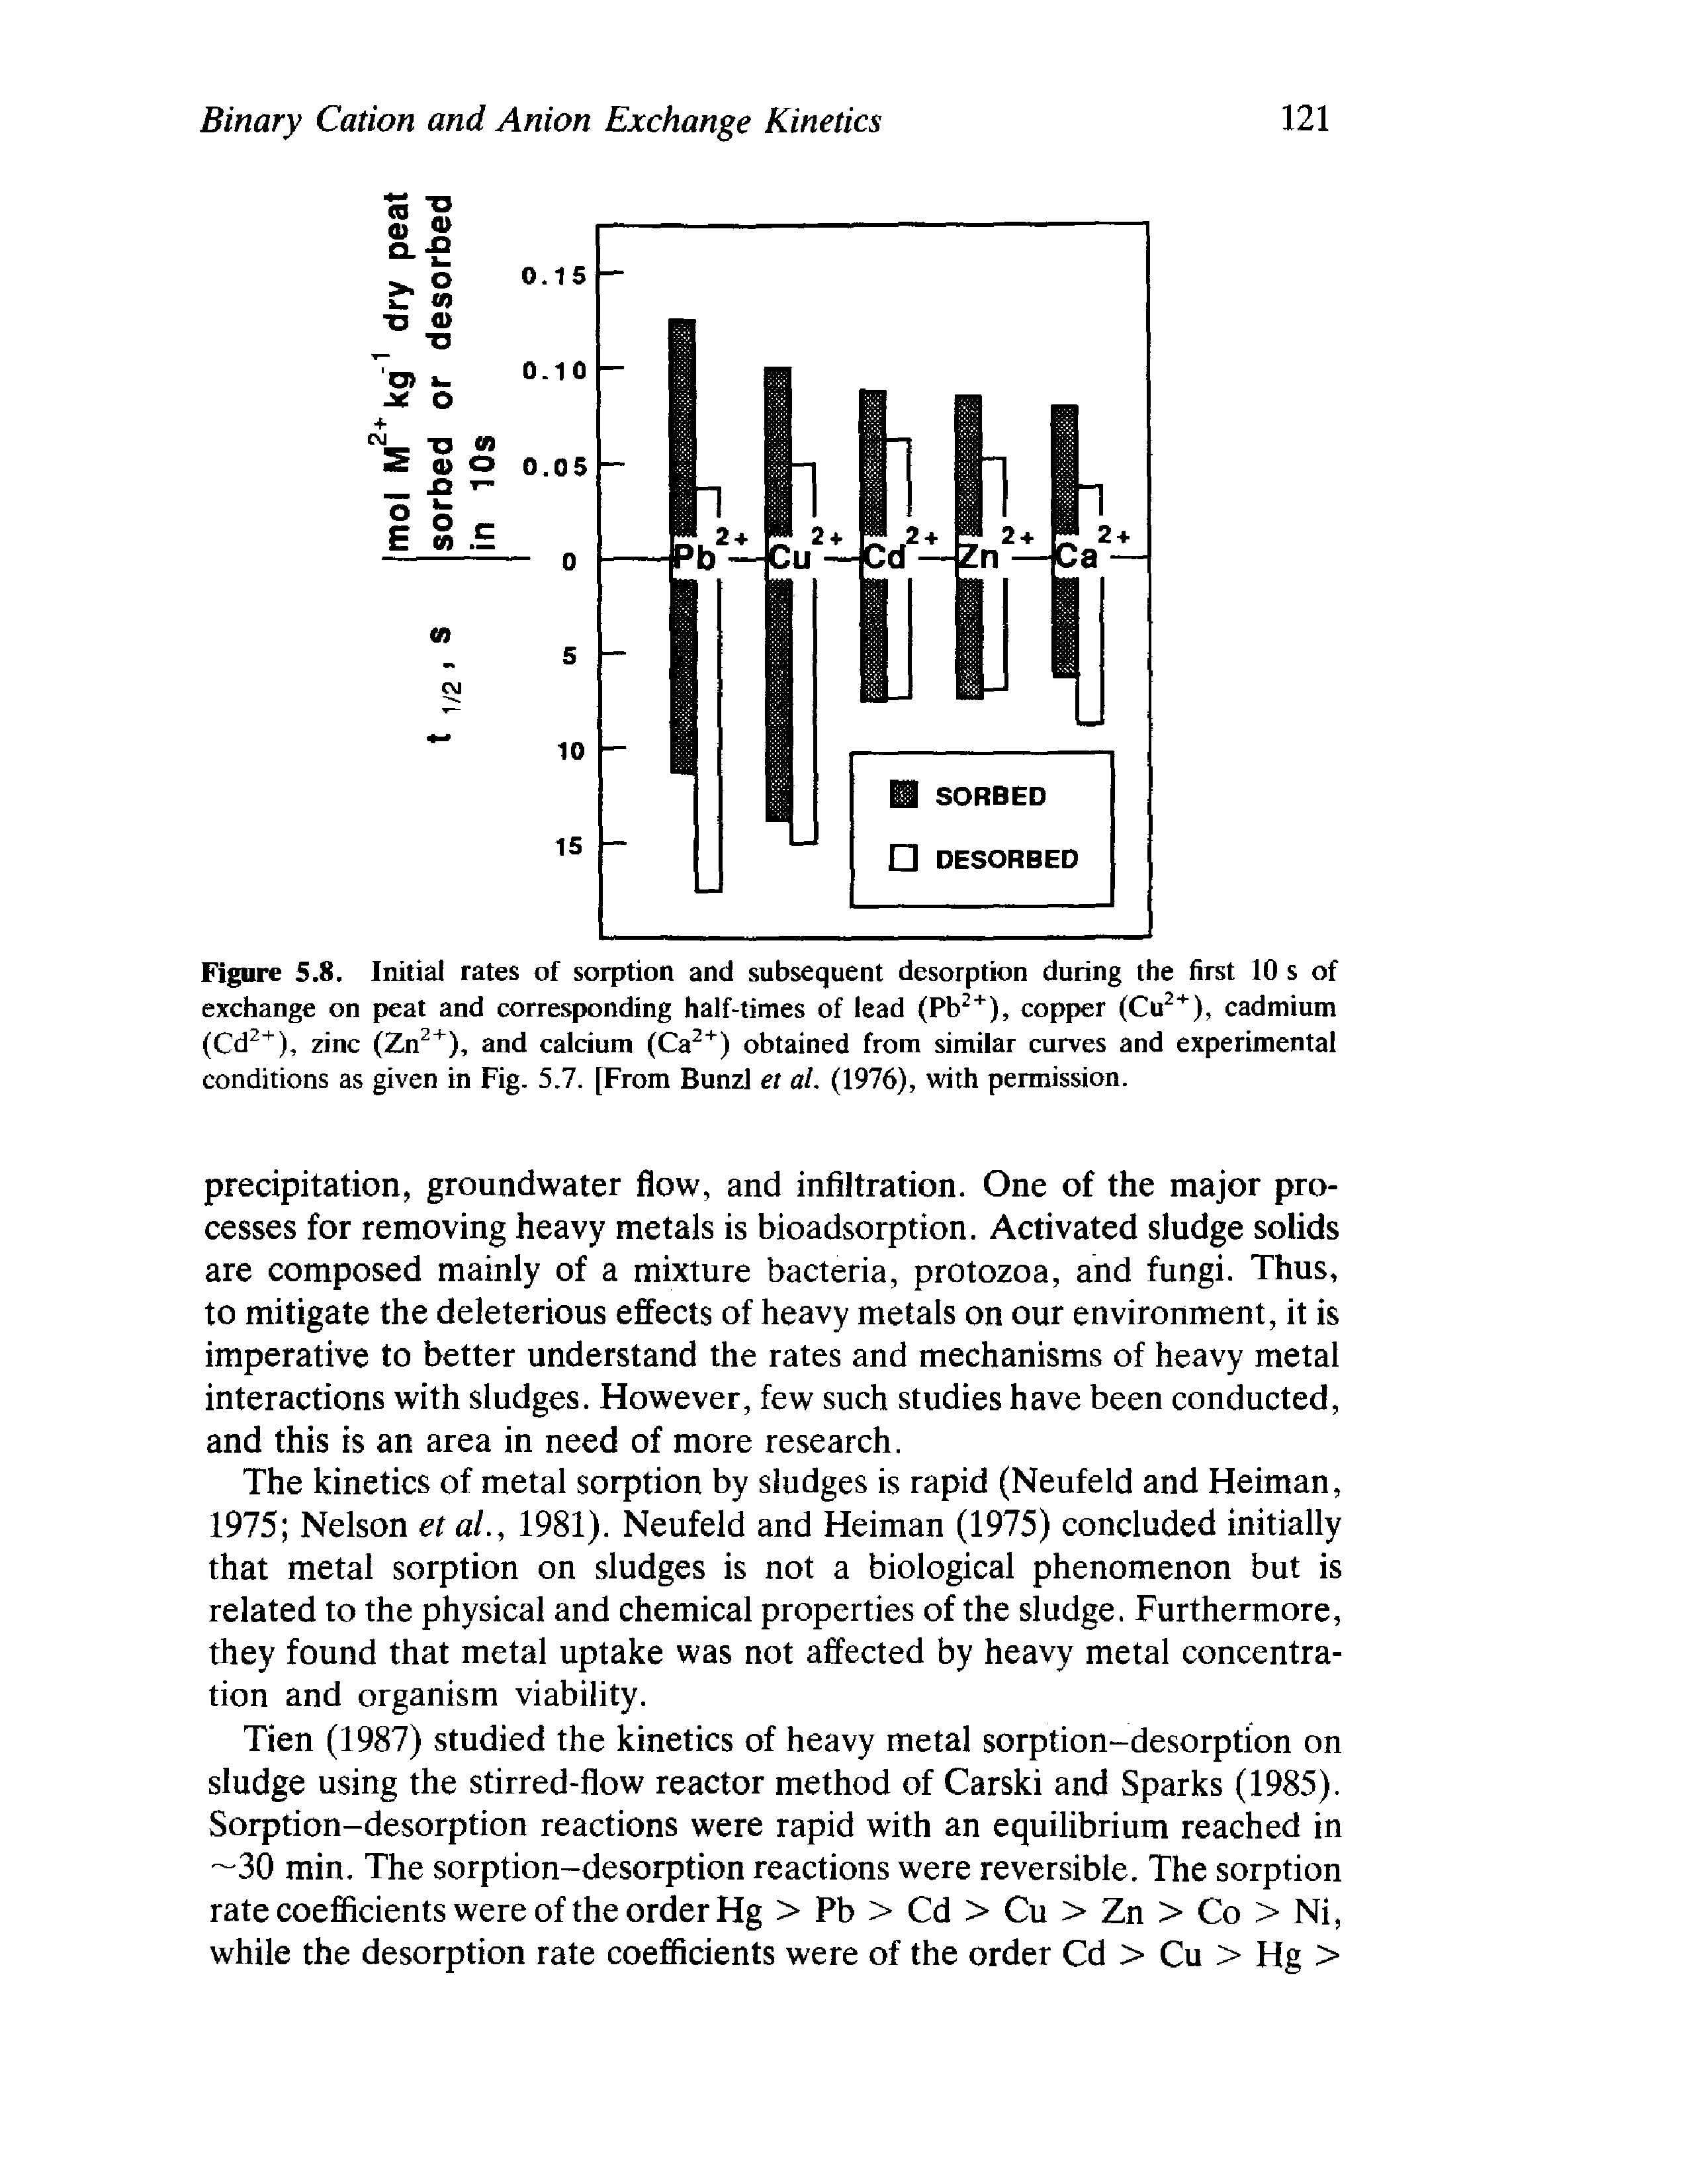 Figure 5.8. Initial rates of sorption and subsequent desorption during the first 10 s of exchange on peat and corresponding half-times of lead (Pb2+), copper (Cu2+), cadmium (Cd2+), zinc (Zn2+), and calcium (Ca2+) obtained from similar curves and experimental conditions as given in Fig. 5.7. [From Bunzl et al. (1976), with permission.